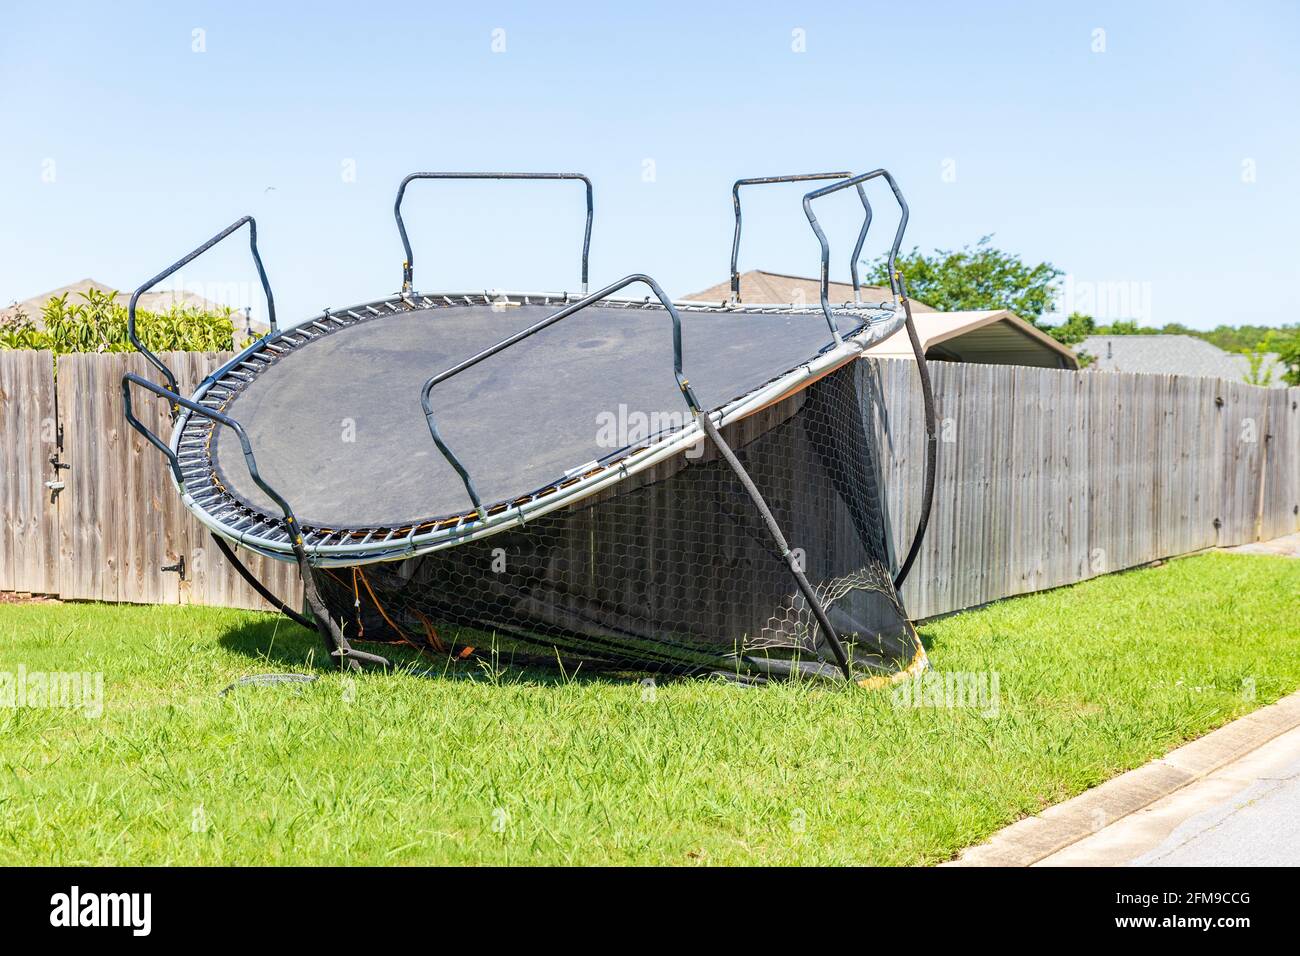 Trampoline damaged and flipped during severe storm Stock Photo - Alamy